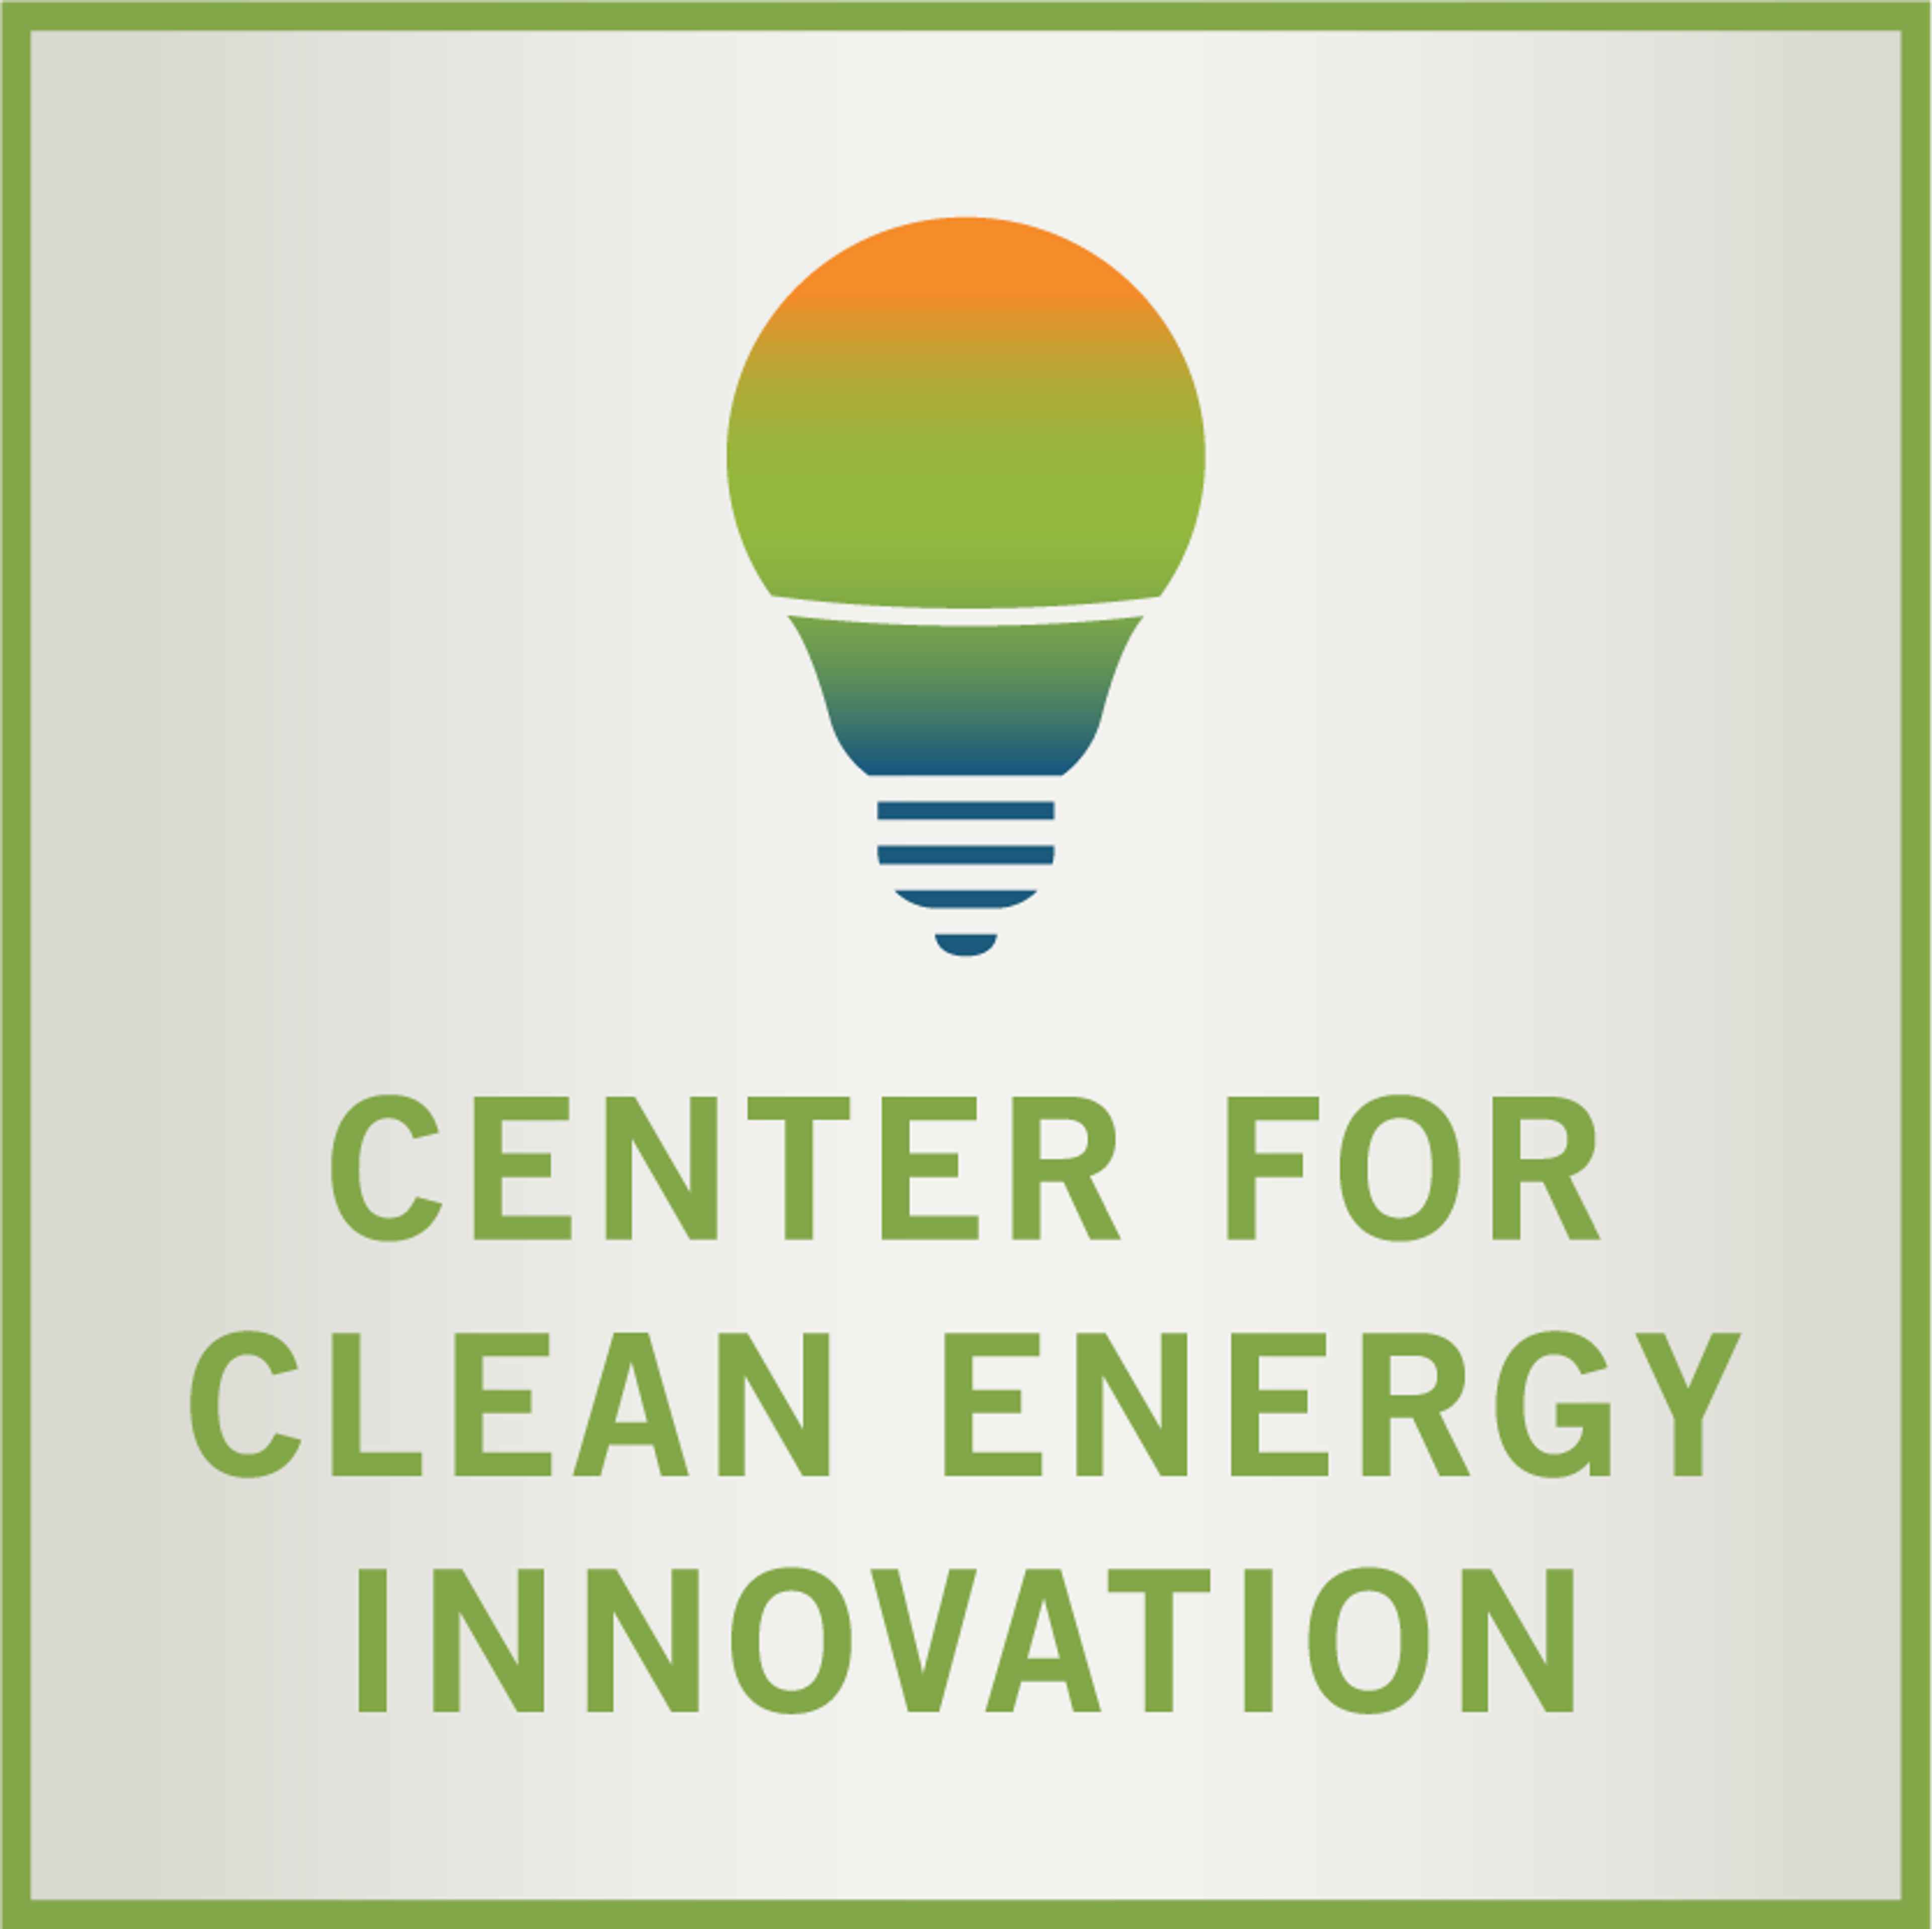 Mind the Gap: A Design for a New Energy Technology Commercialization Foundation